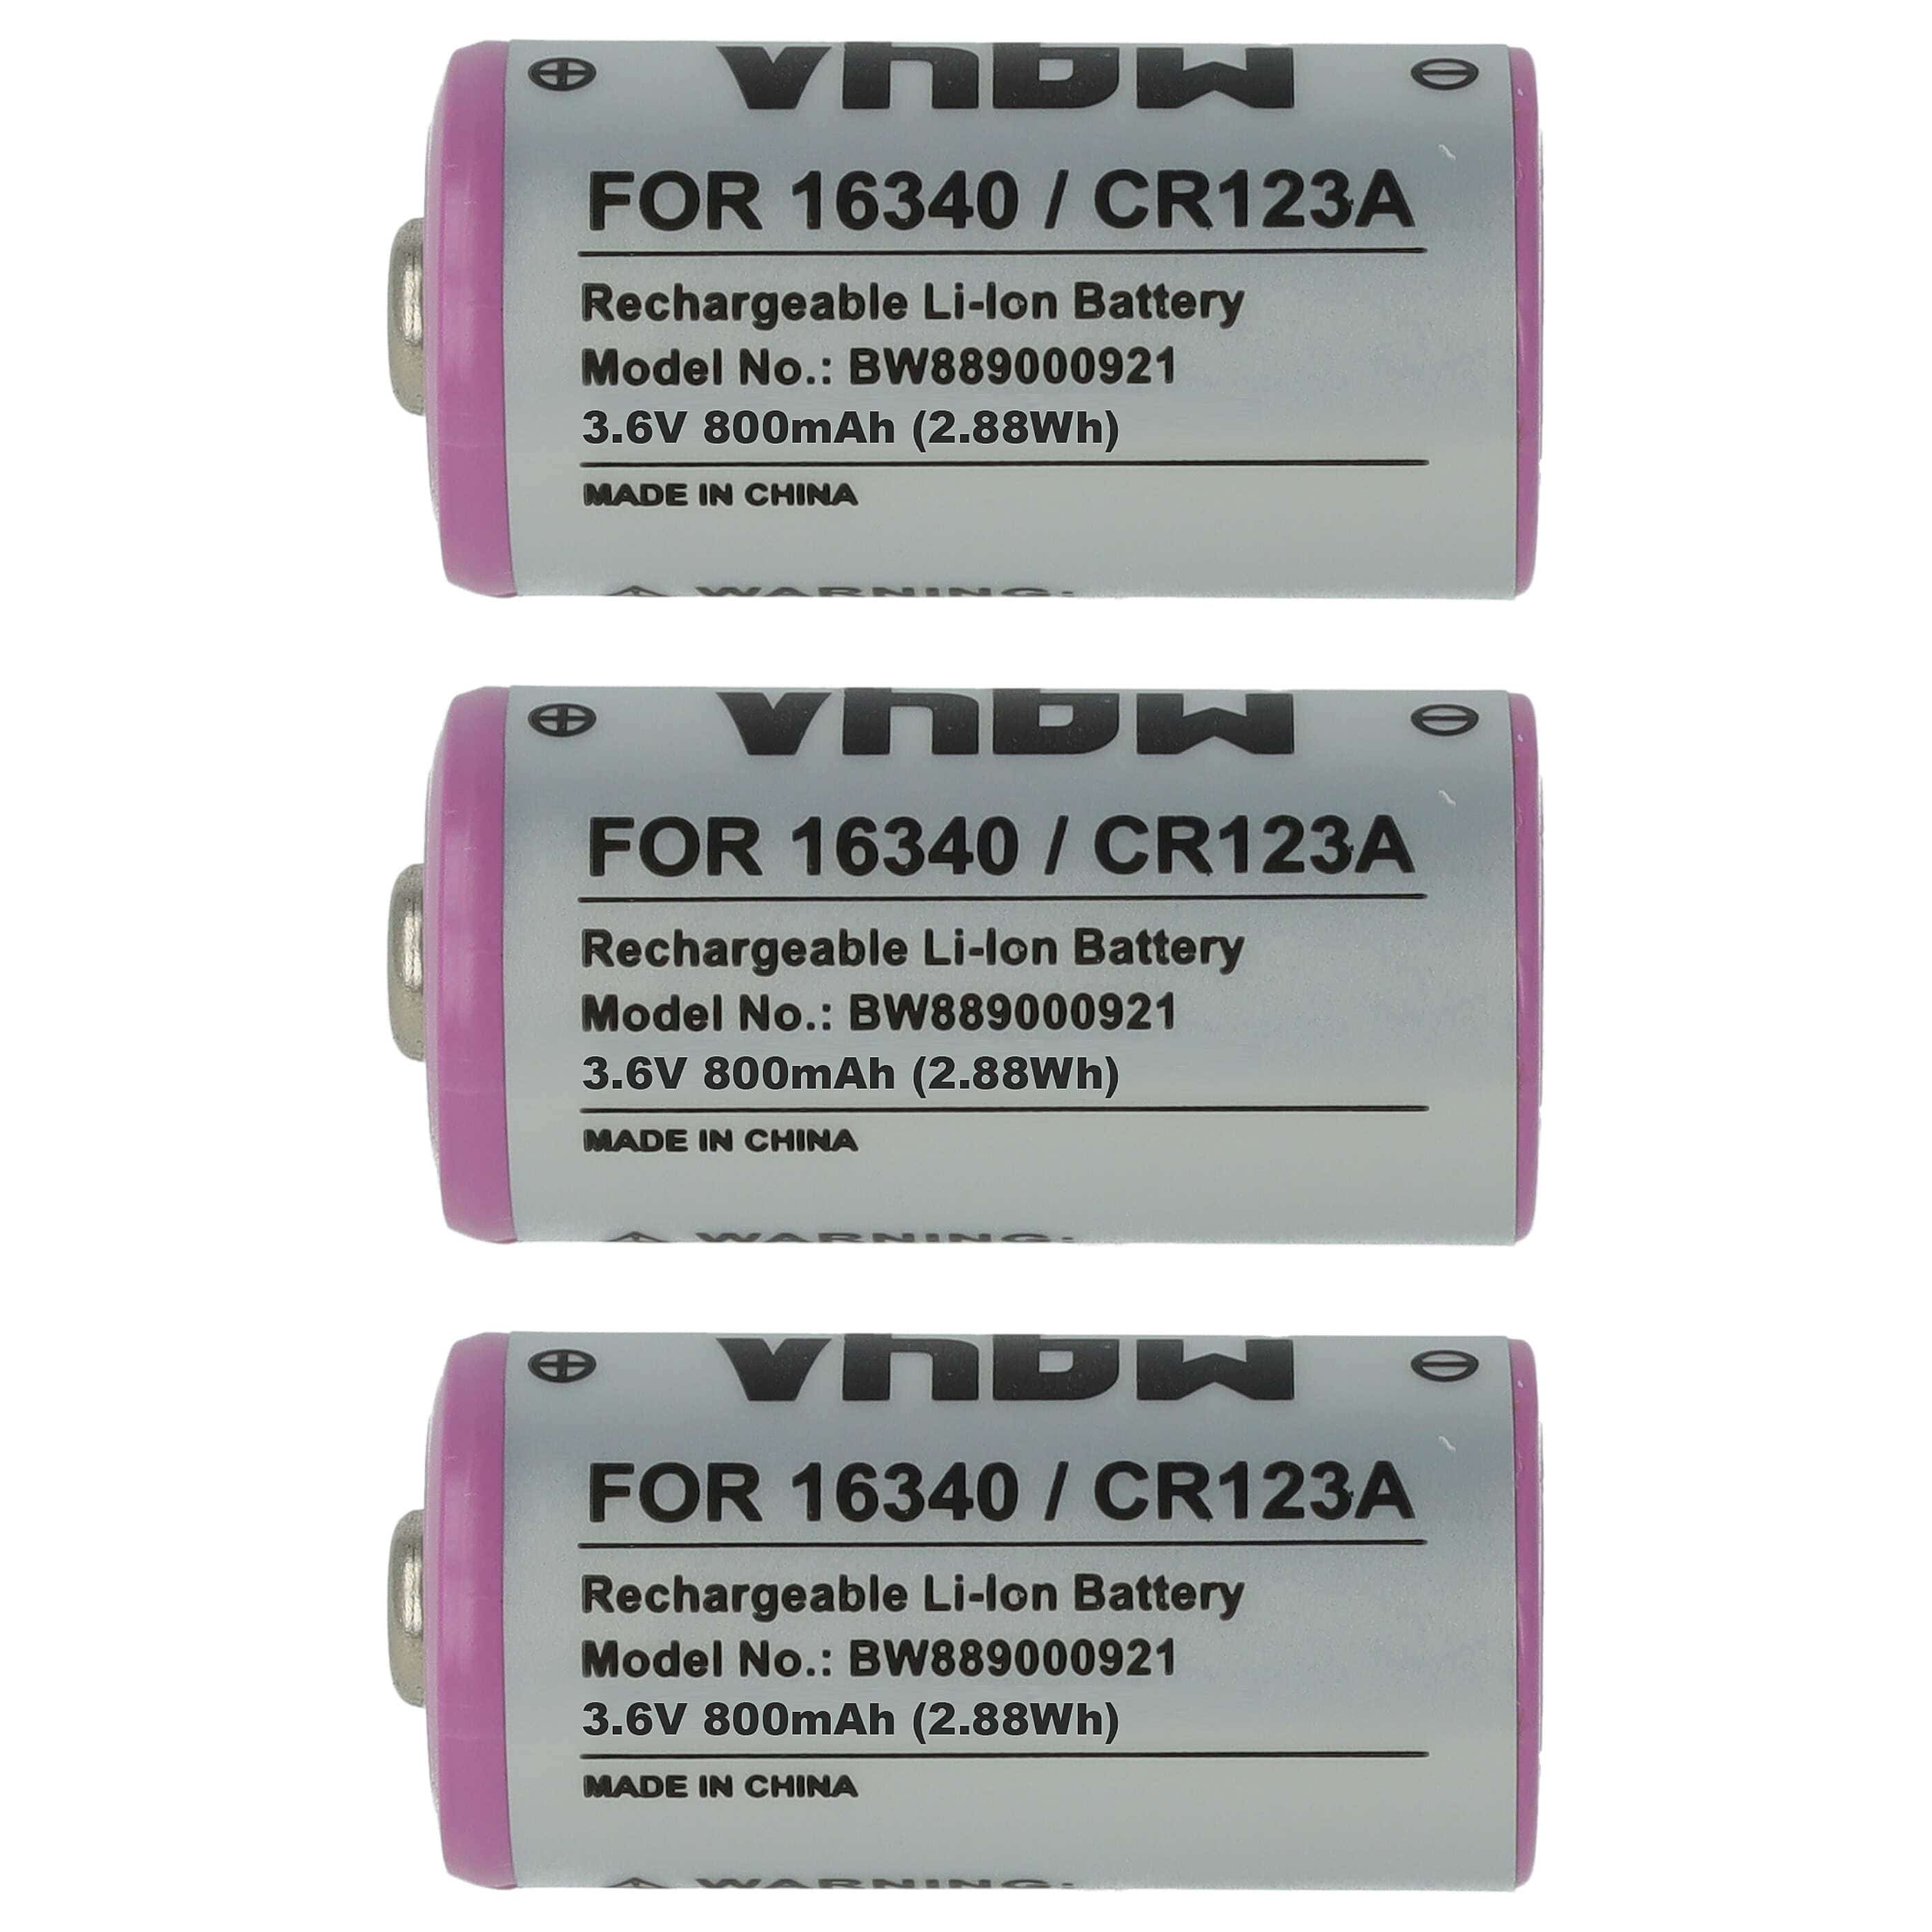 Universal Battery (3 Units) Replacement for 16340, CR123R, CR17335, CR17345, CR123A - 800mAh 3.6V Li-Ion